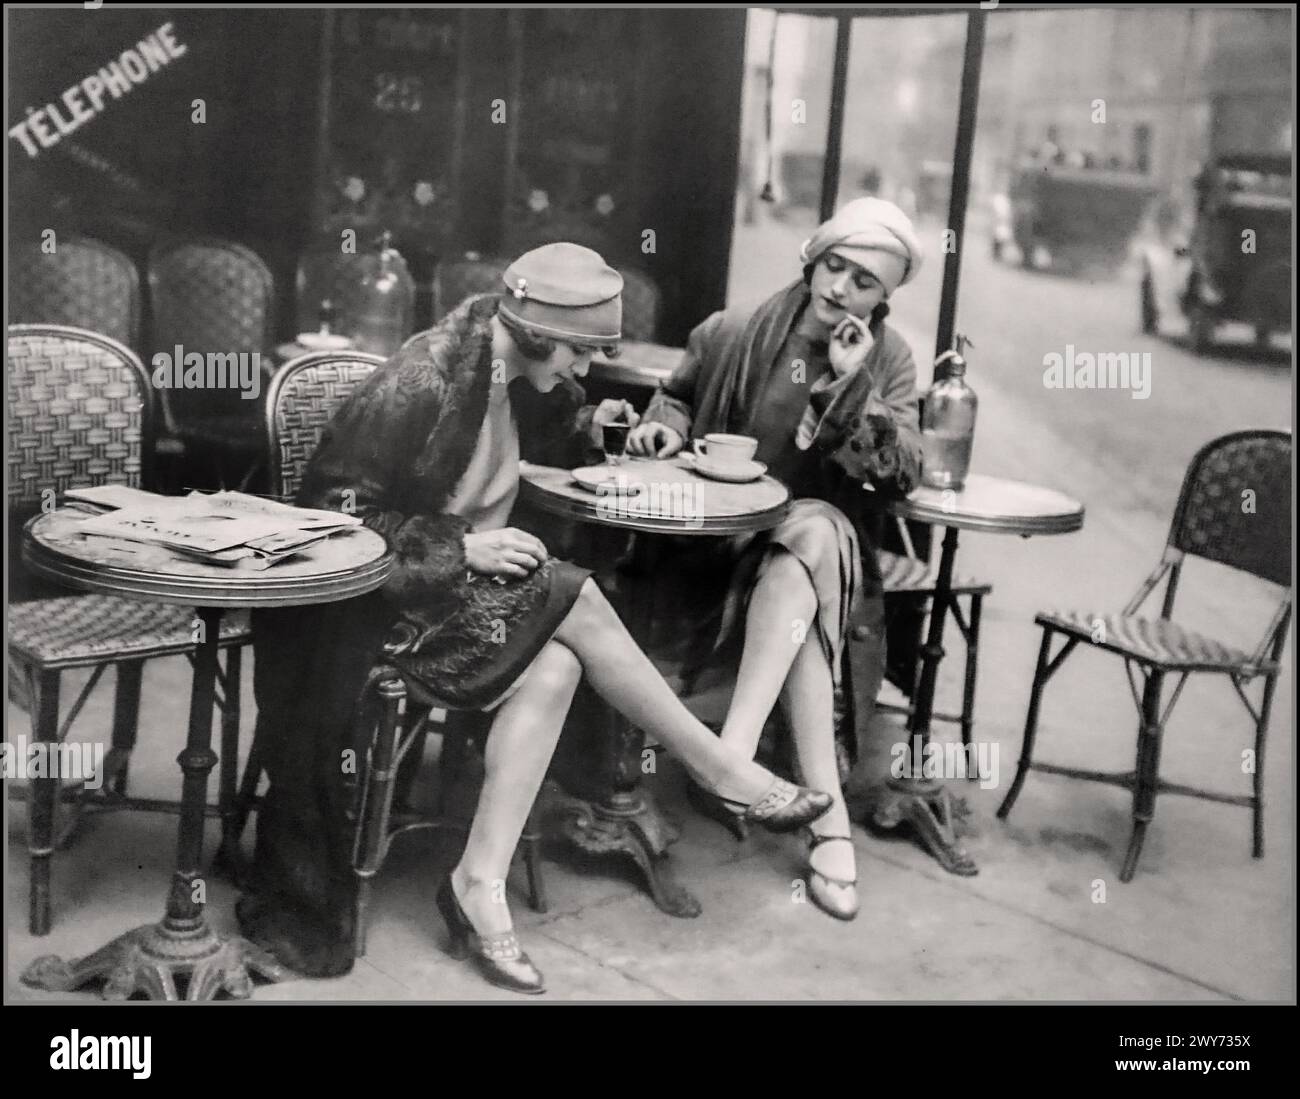 Vintage Paris Cafe 1920s,B&W two stylish fashionable ladies enjoy coffee/ drinks at a Boulevard Cafe Paris France 1920's style fashion architecture and retro lifestyle.The flapper style was the style most people think of when they think of 1920s fashion. Flapper women chopped off their hair into a short, almost masculine style. They wore short, loose fitting dresses, smaller hats such as cloches, a simple hat shaped like the bell of a flowerpot. Stock Photo